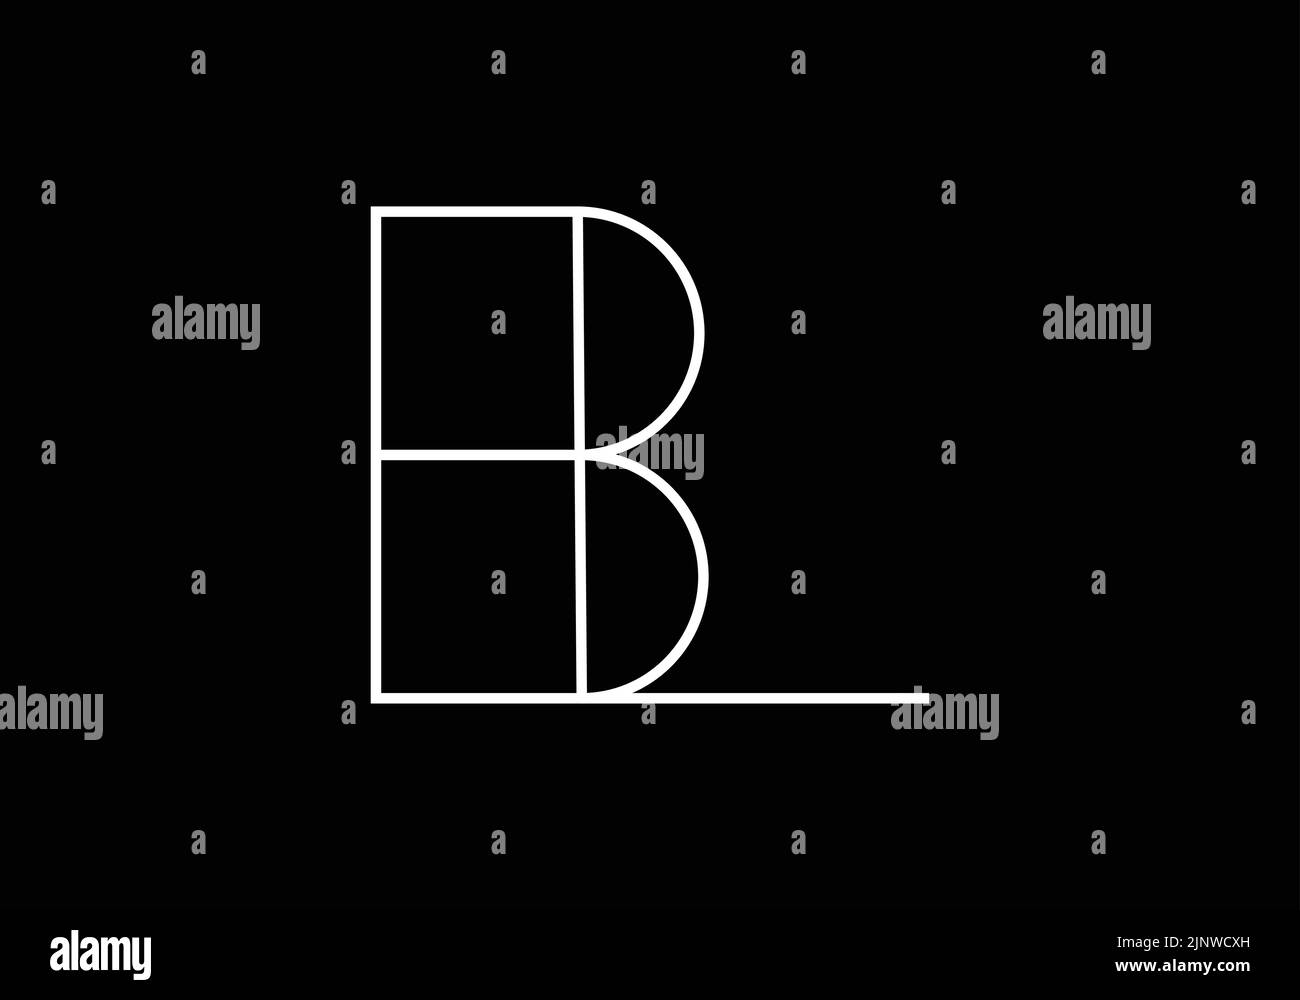 Abstract Alphabets Letters BL or LB Logo Stock Vector